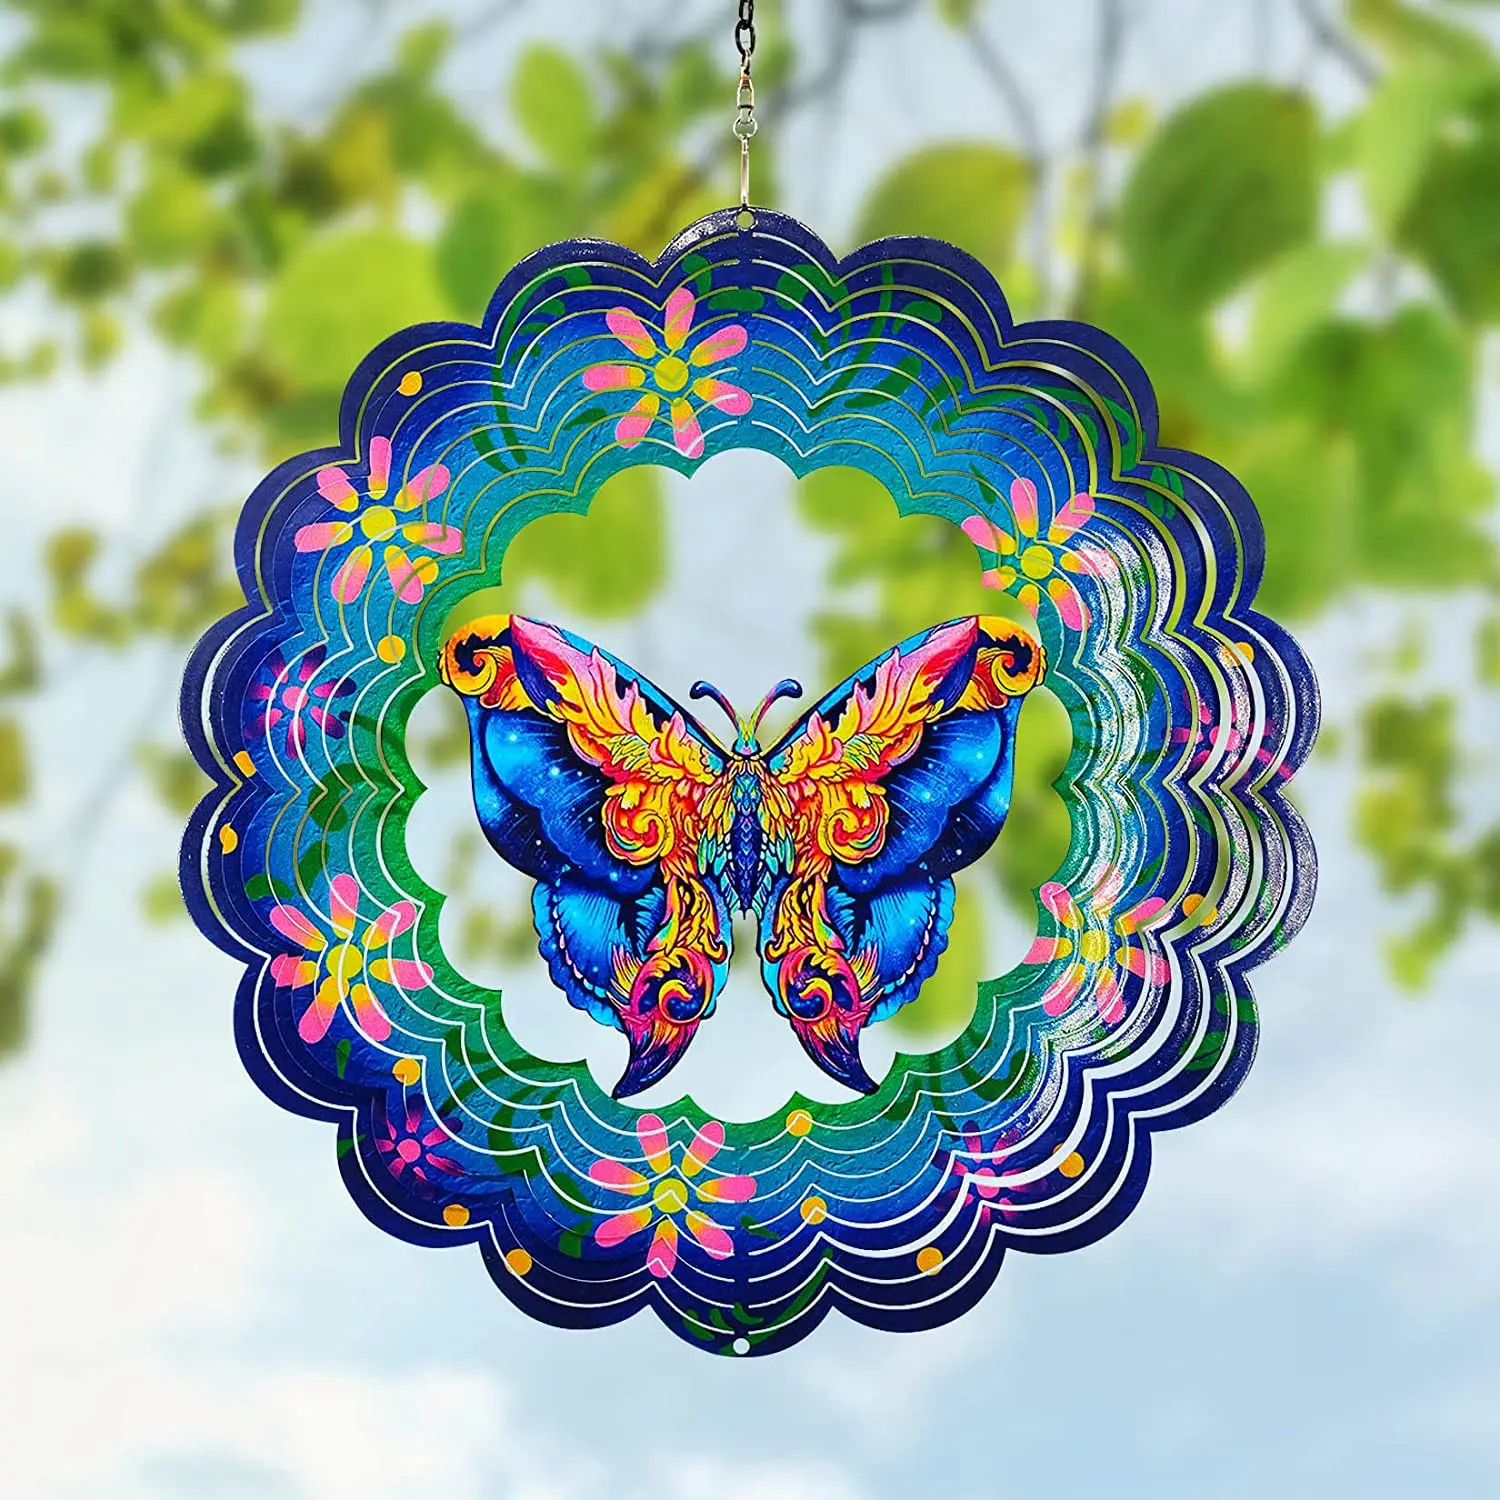 3D Hanging Butterfly Metal Wind Spinners Window Hanging Butterfly Decor Wind Magical Kinetic Outside Decoration Yard Garden 30cm